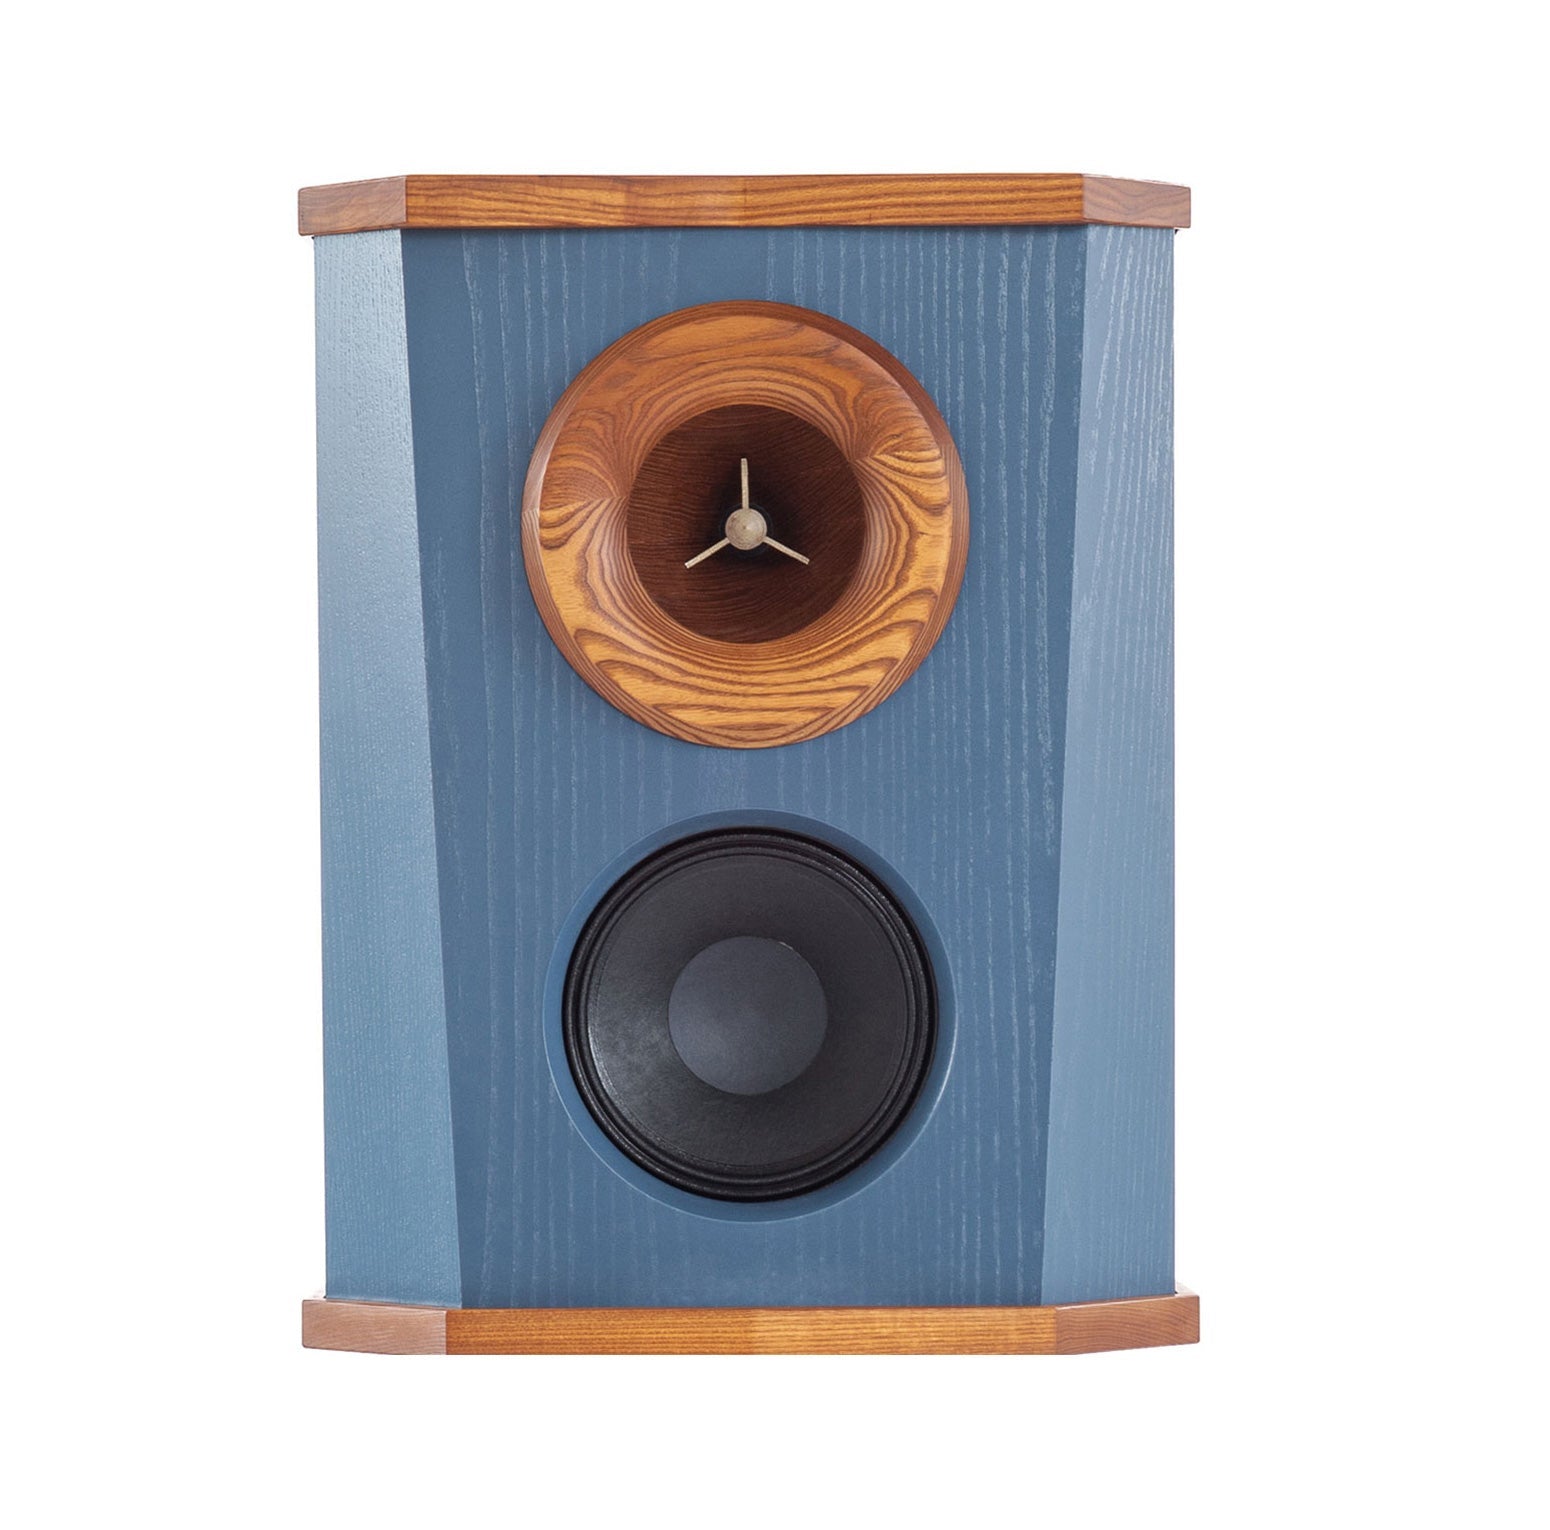 The DeVille loudspeaker is an extremely high quality, compact, two way design made from sustainably harvested, solid Pennsylvania ash hardwood that has been torrefied (thermally treated for tone and stability.) It is the most powerful and efficient design possible for its size, using real professional drivers capable of much lower distortion and higher power handling.